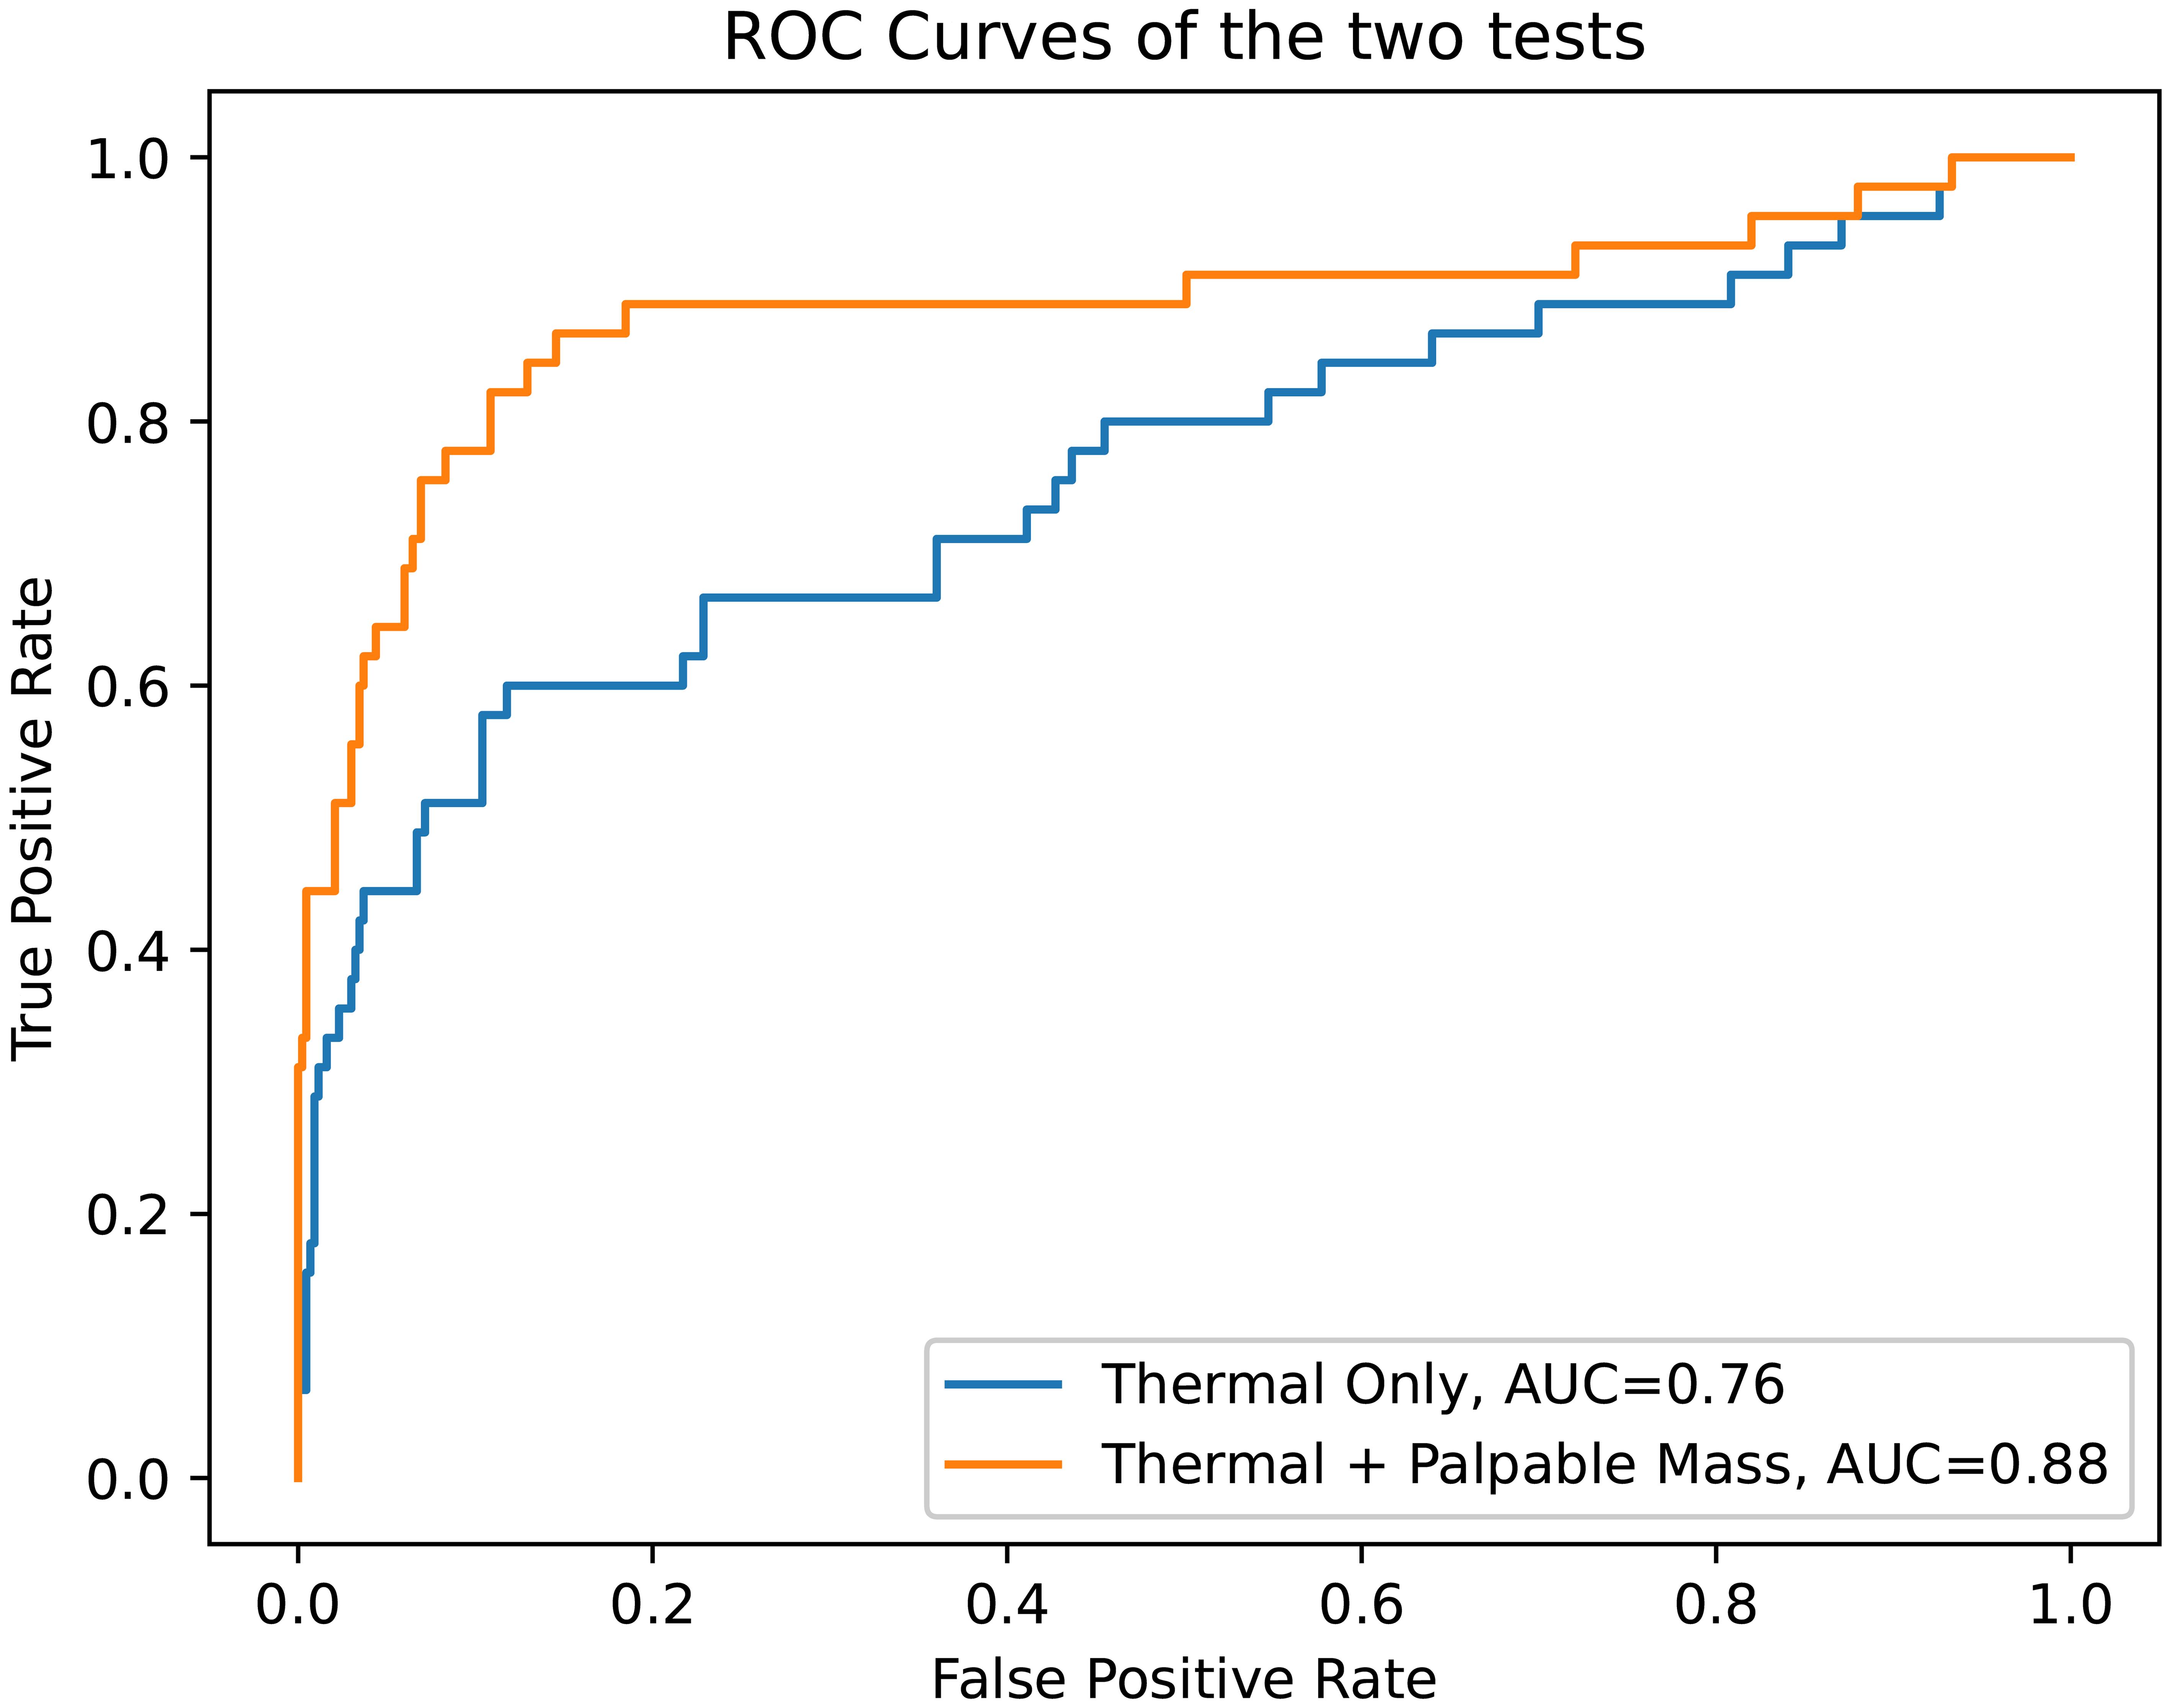 ROC curves comparing the diagnostic performance of 2 models for breast cancer detection.